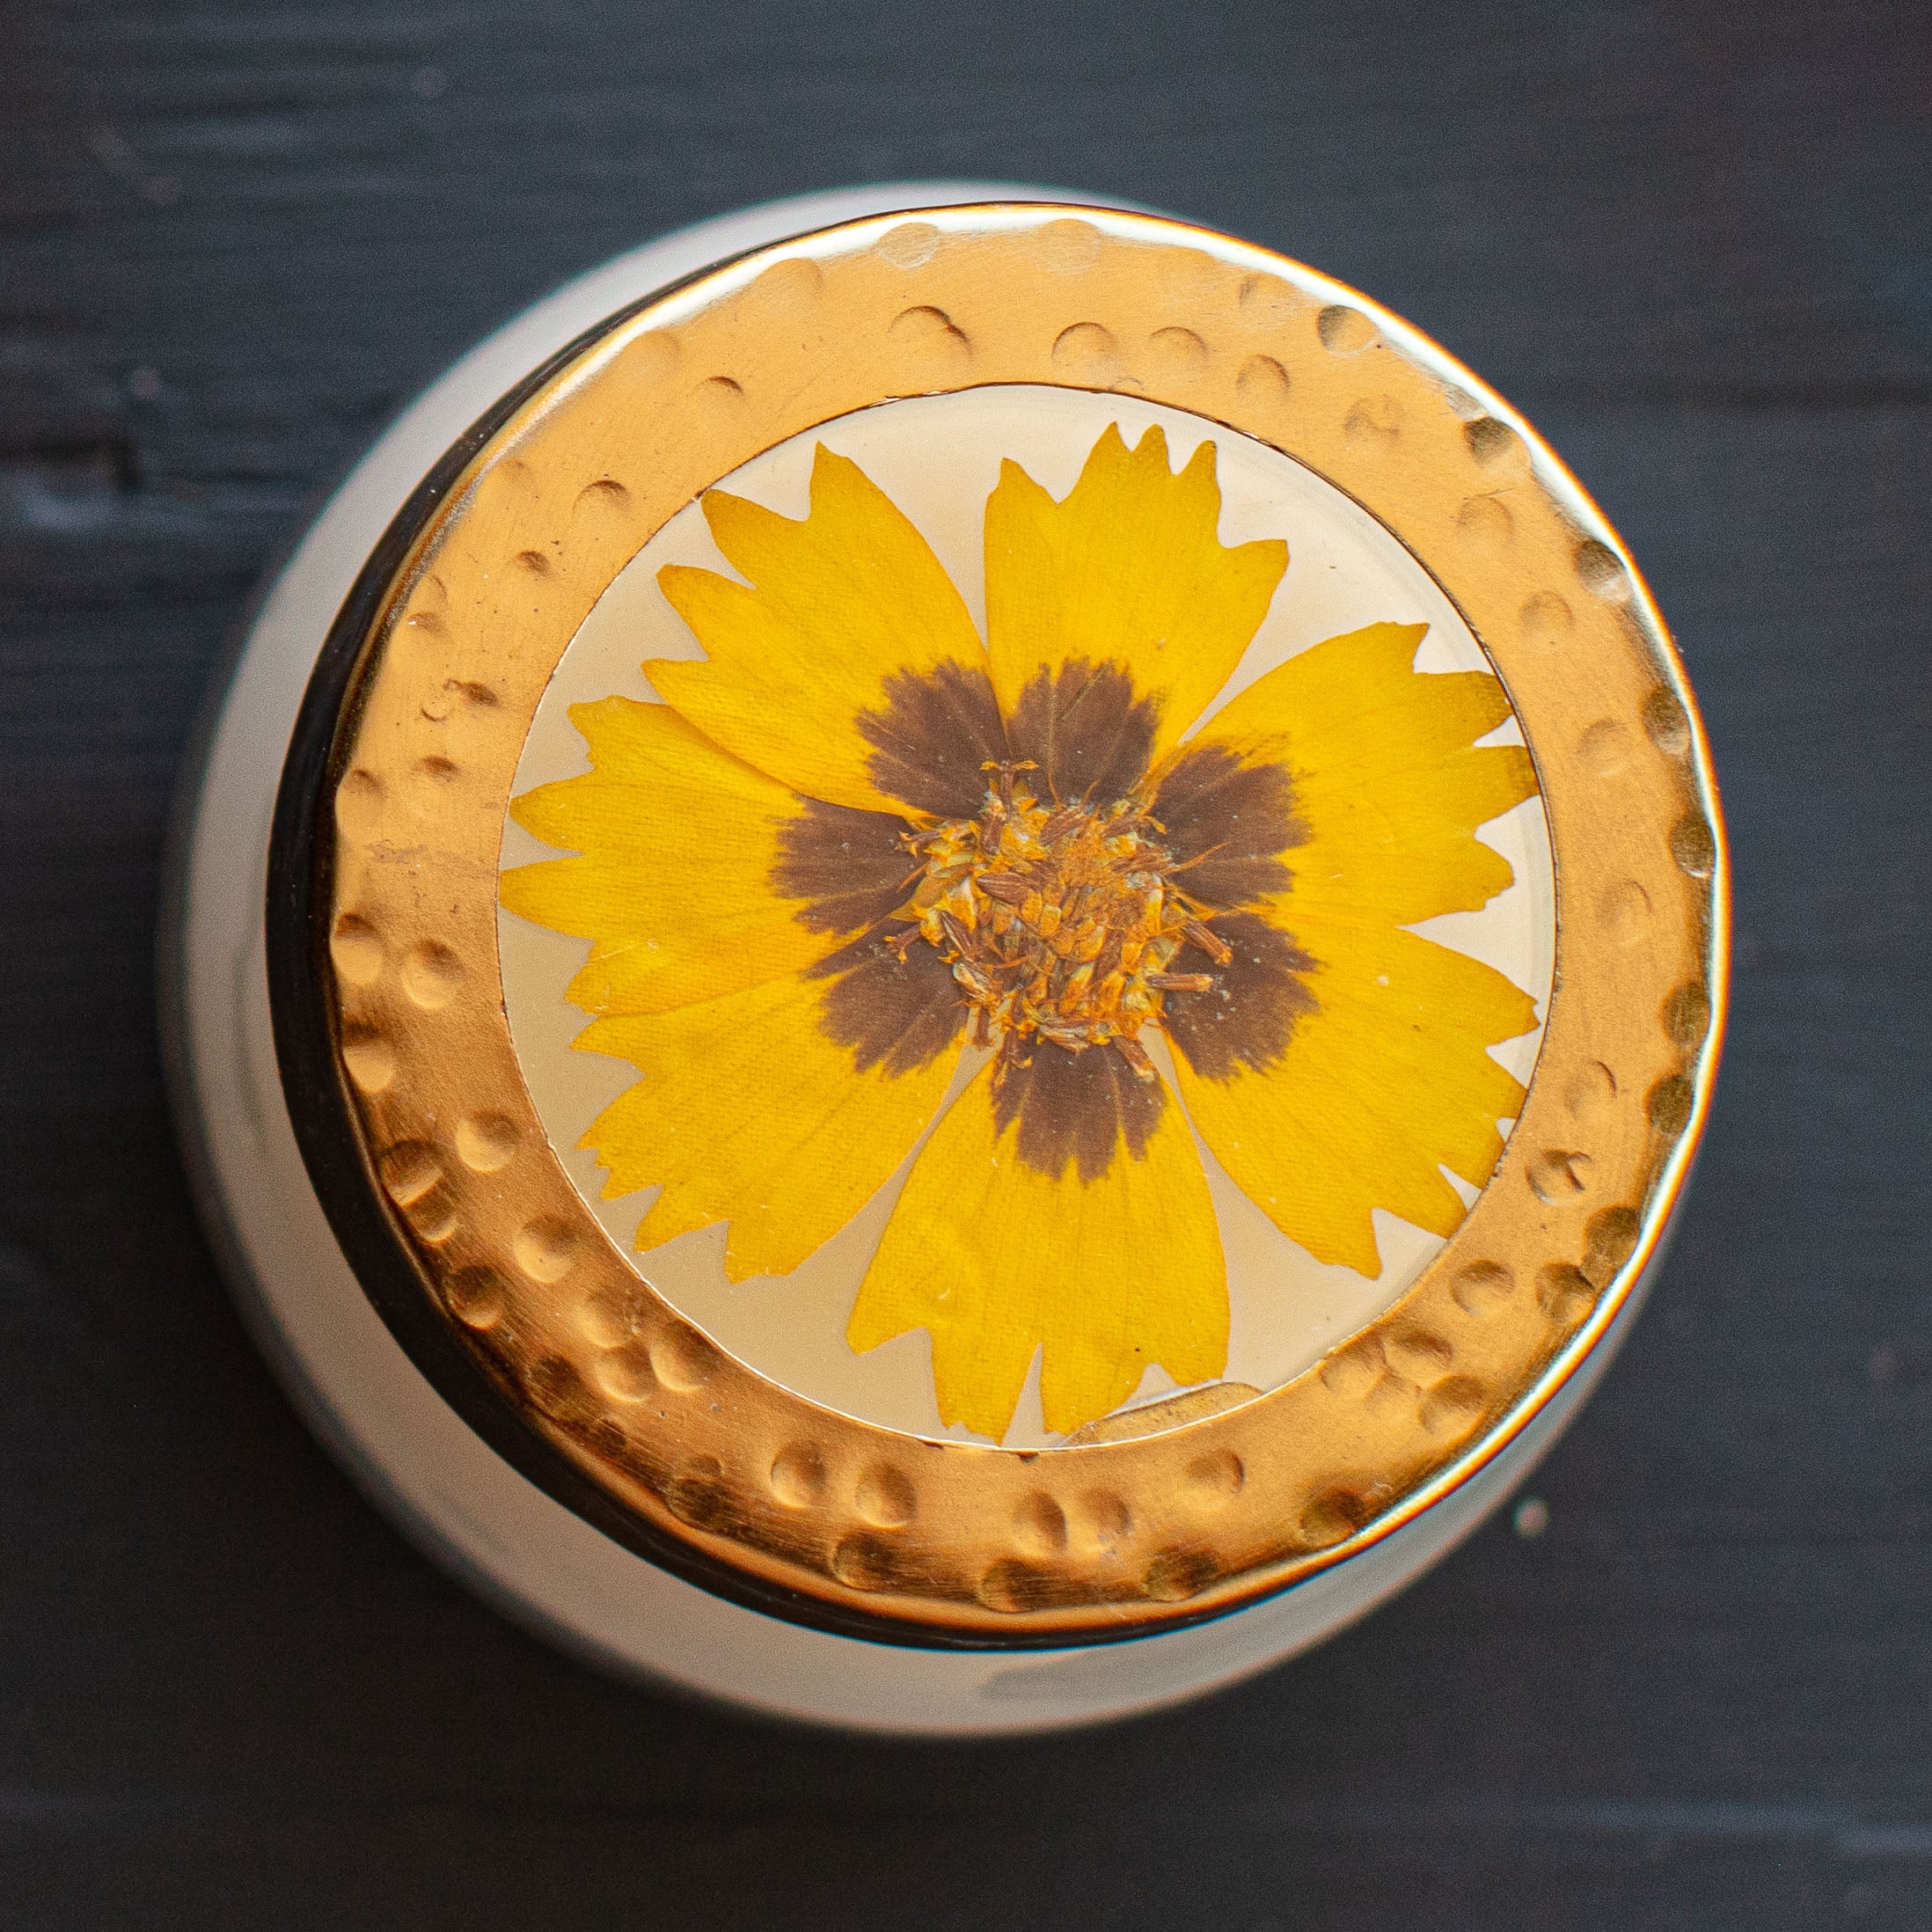 Botanical Candle: Honey Tobacco — Wildly Floral Co.